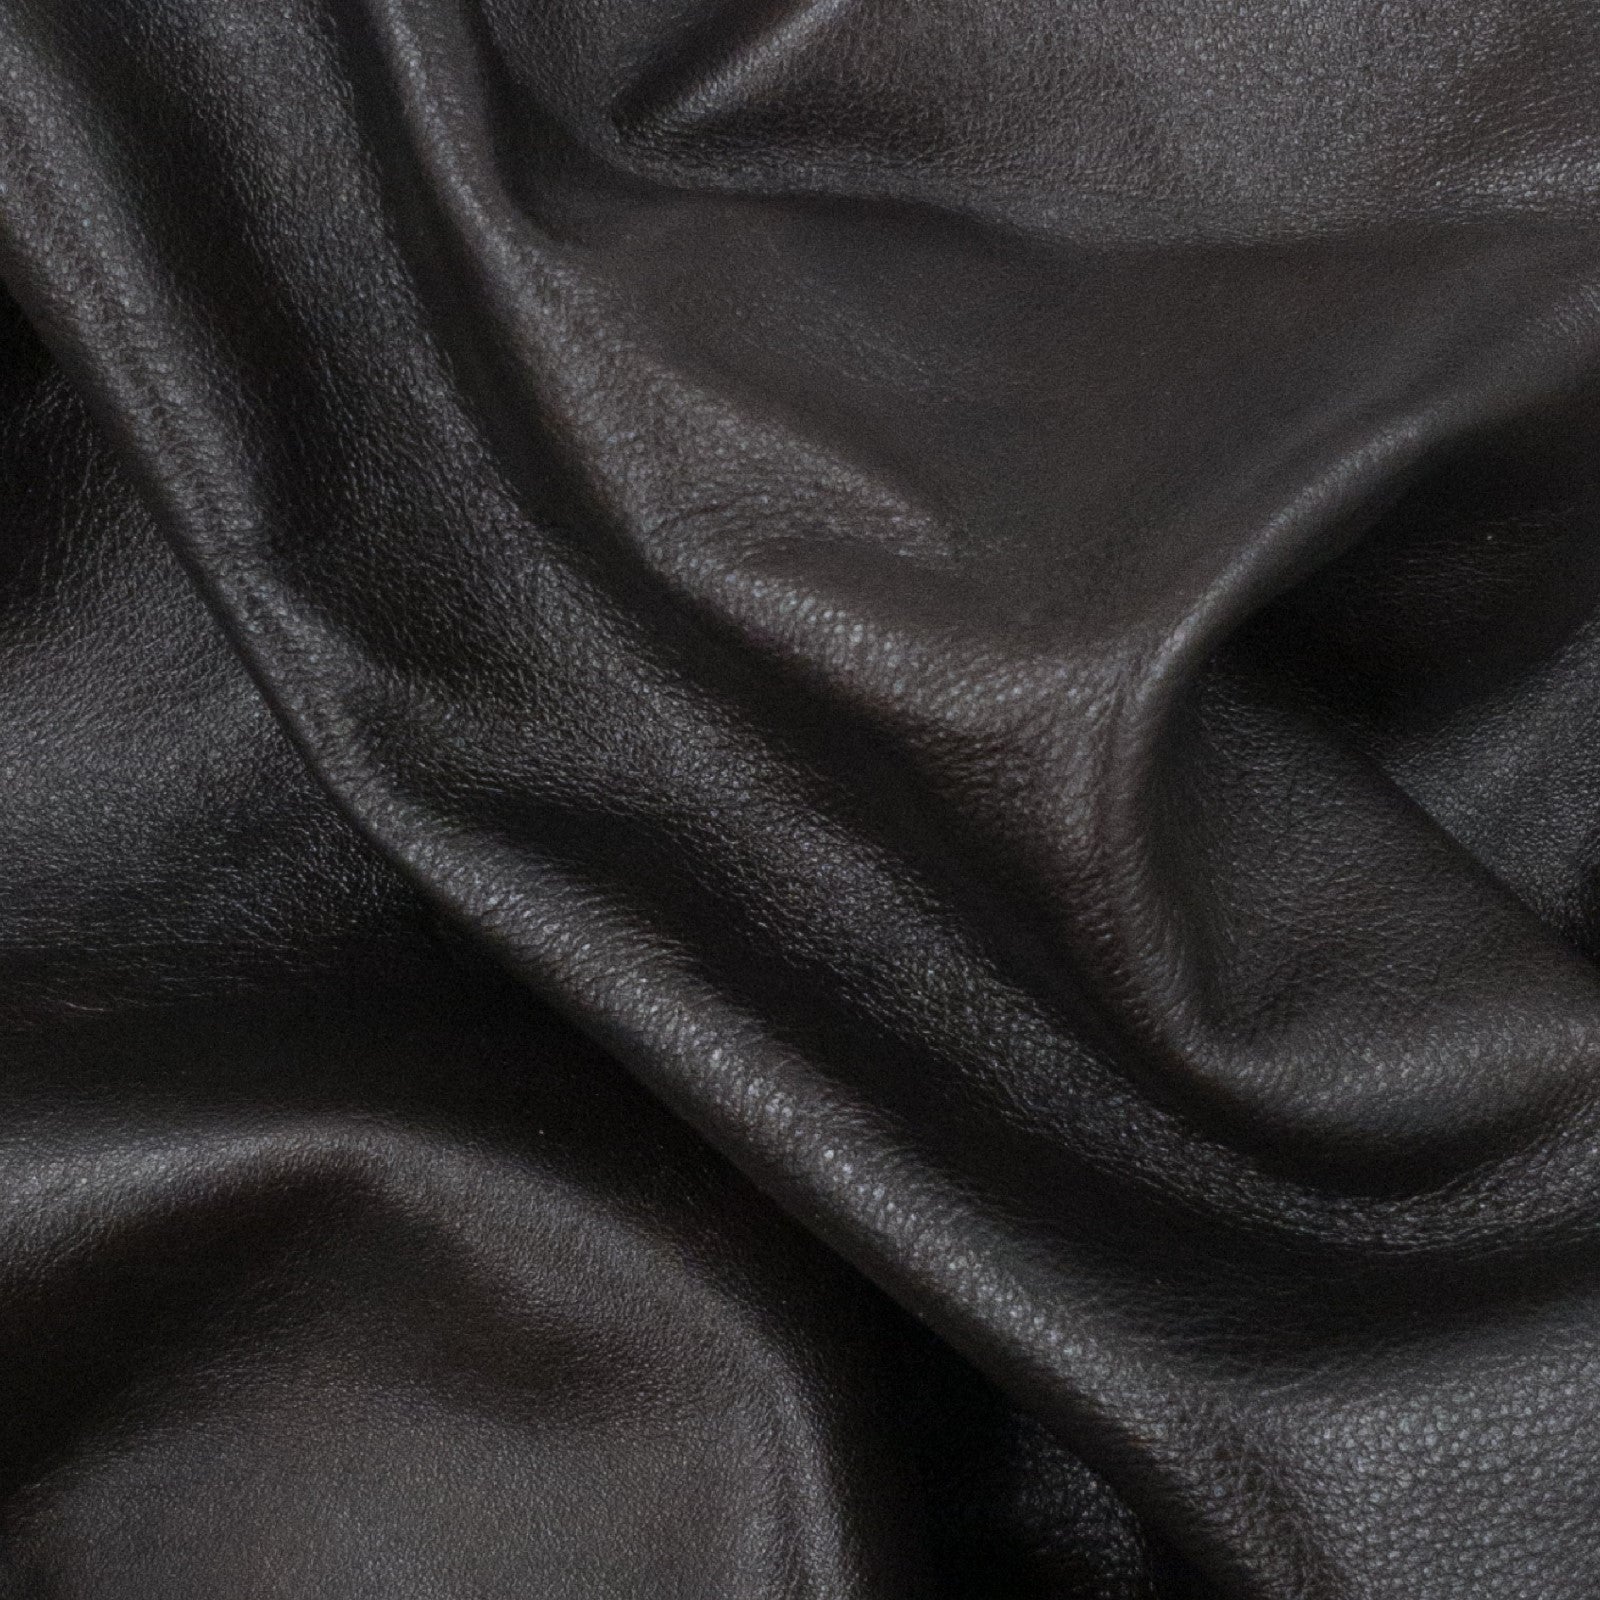 Dark Brown, 2-4 oz, 3-10 Sq Ft, Upholstery Cow Project Pieces, Dark Brown 10 (2-3oz) / 7-10 Sq Ft | The Leather Guy